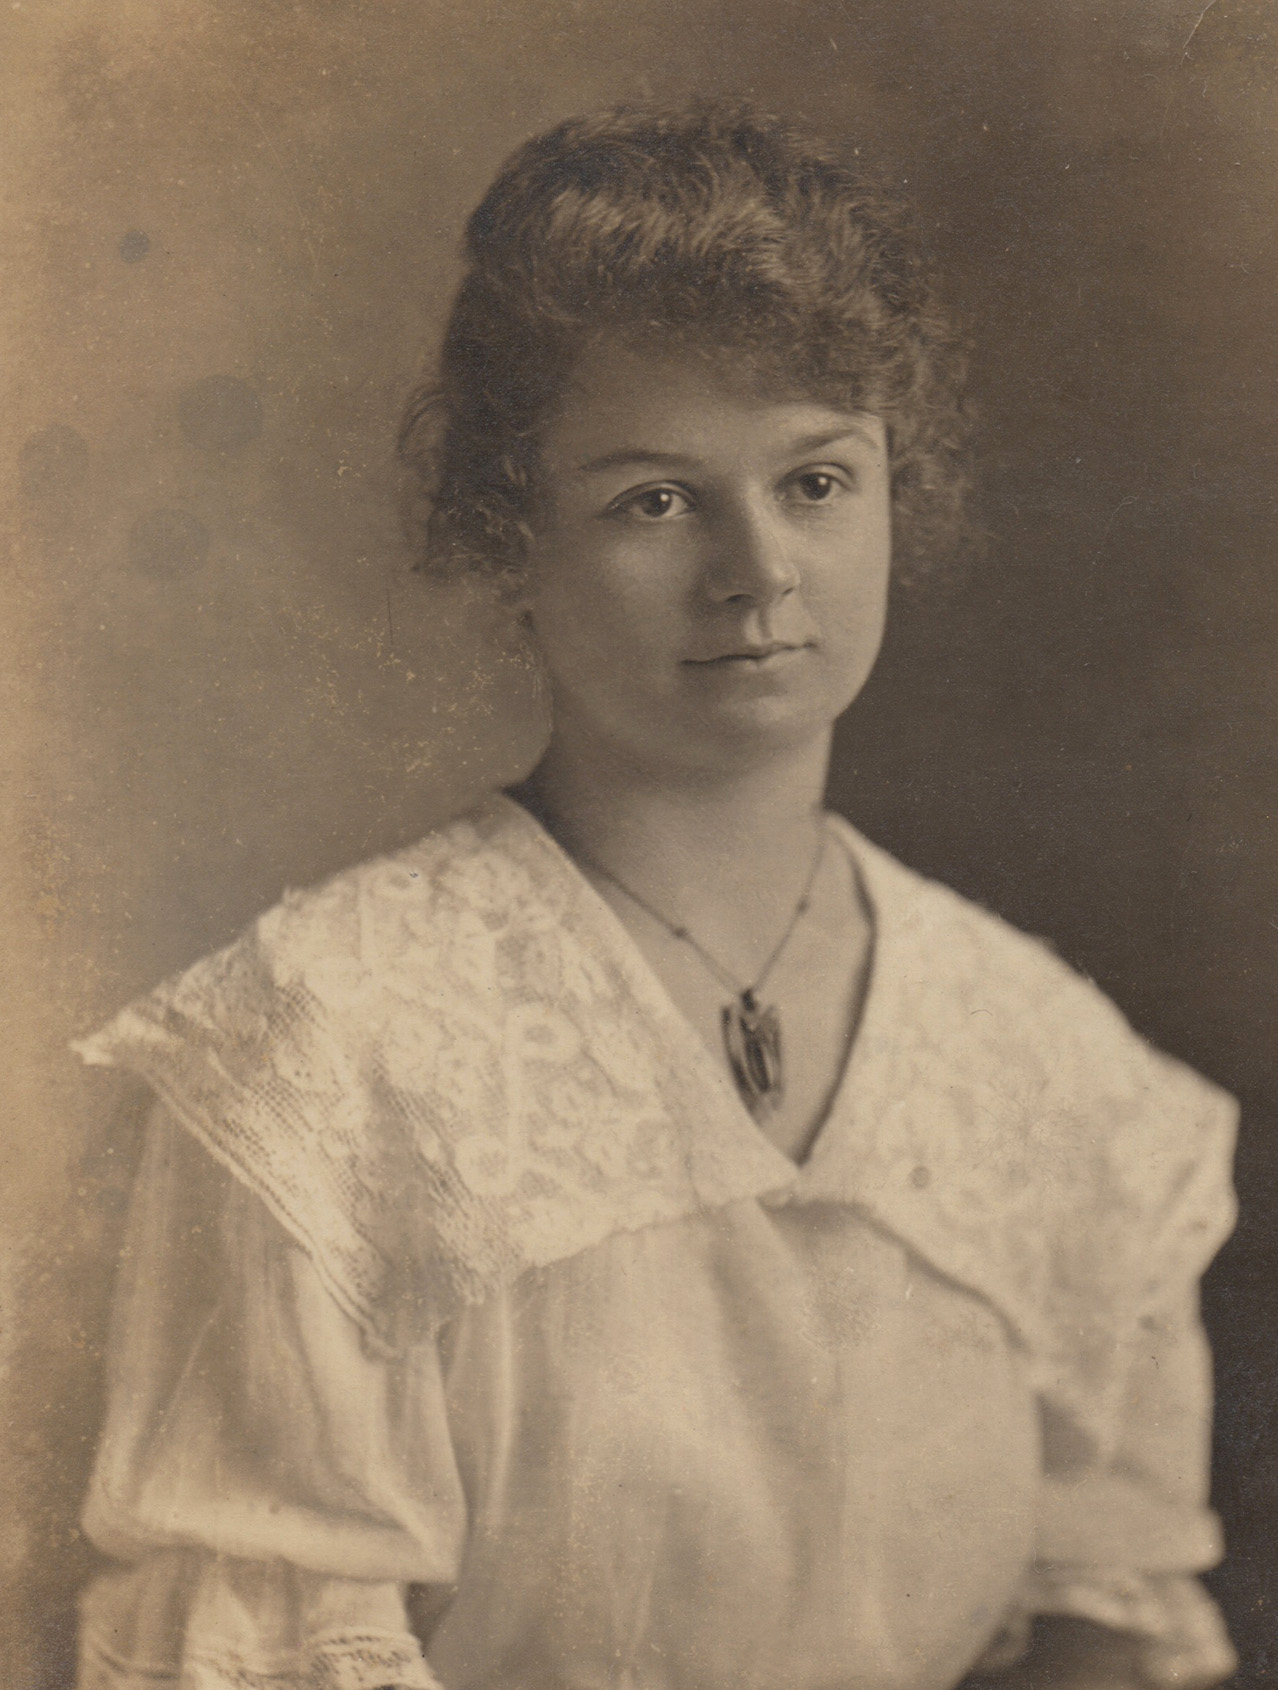 Lucille Laura Triplett, 1916, 18 years old. Davenport, Iowa. View full size.

[A relative of yours? -tterrace]